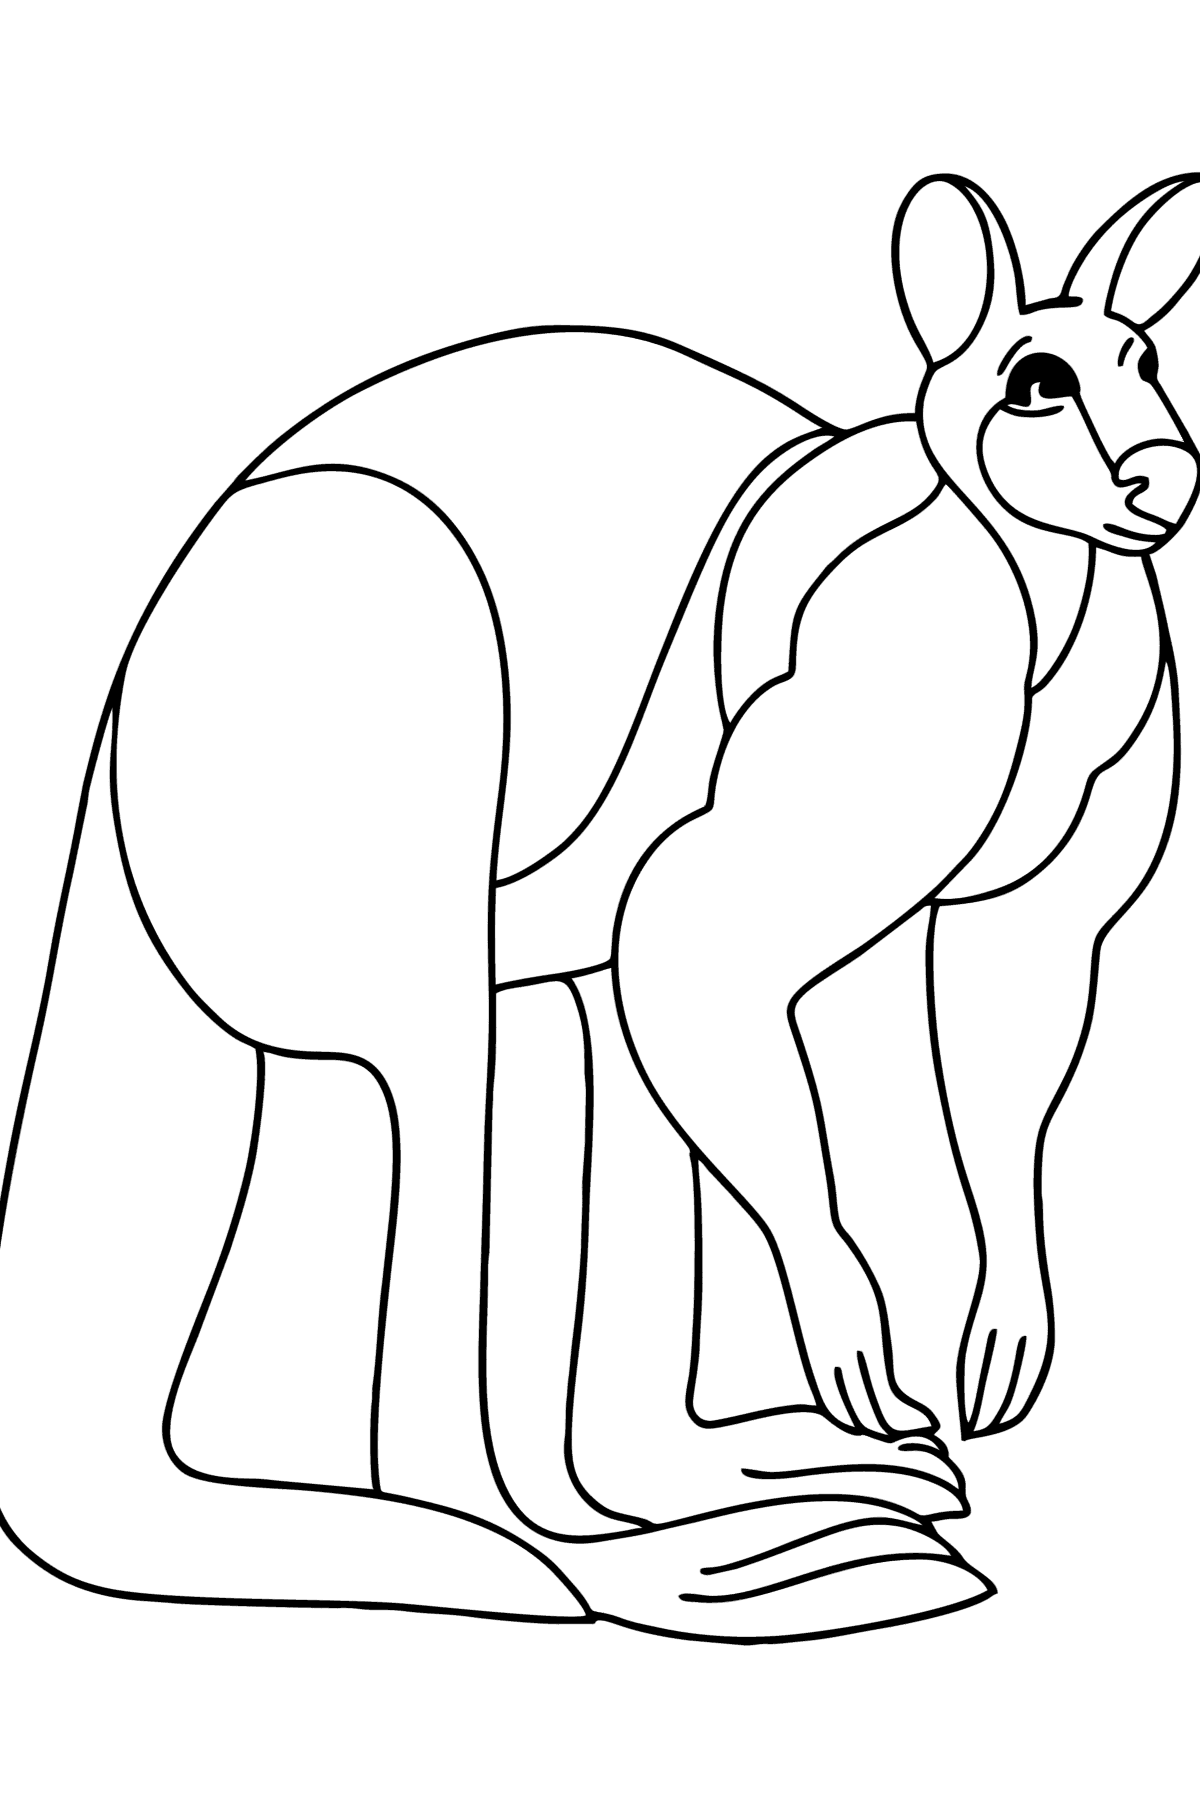 Ginger Kangaroo coloring page - Coloring Pages for Kids